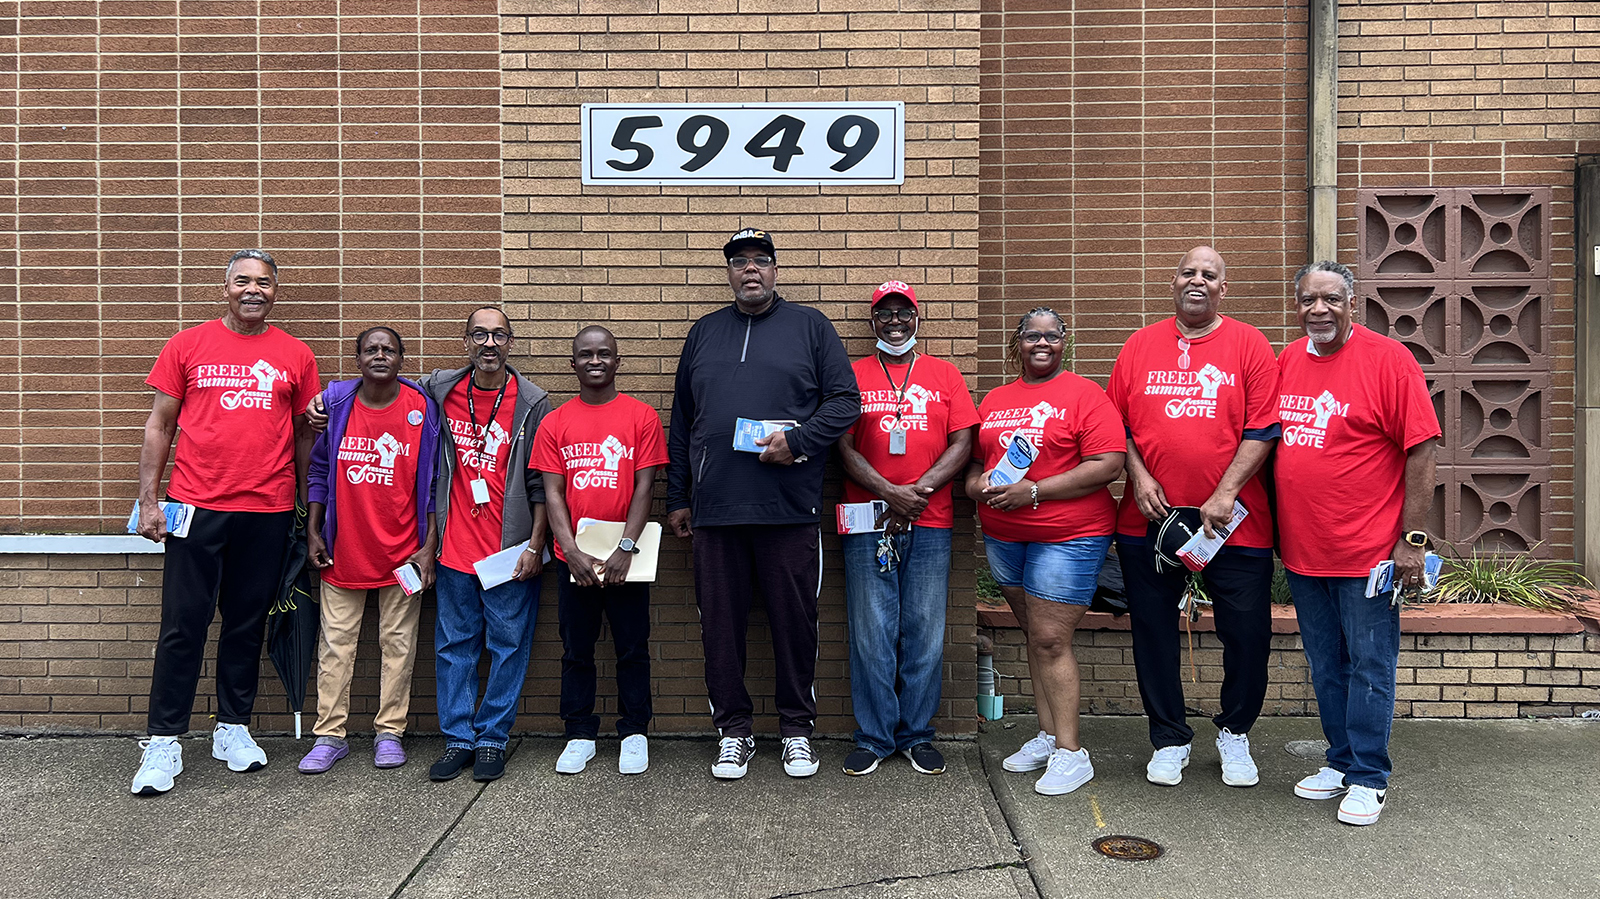 Members of Faith Community United pose together while canvassing in Cleveland, Ohio, Monday, Aug. 7, 2023. RNS photo by Kathryn Post